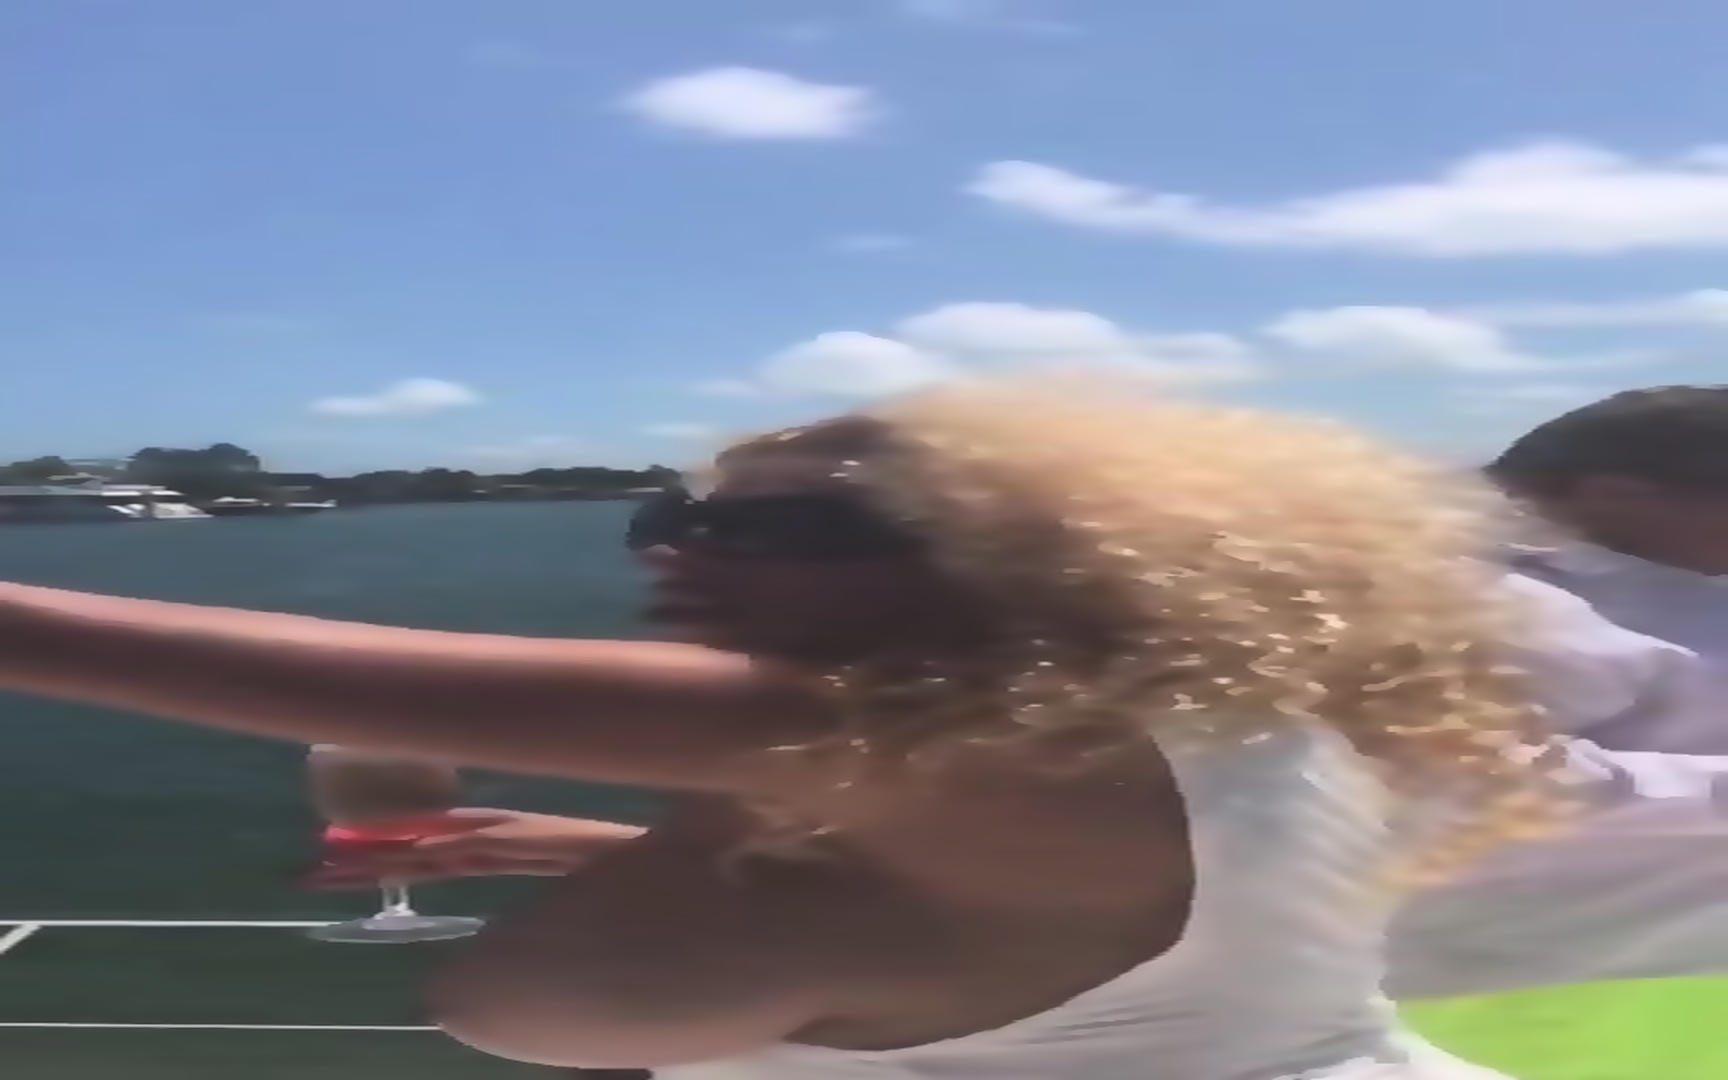 People From France Beyonce Topless On Watercraft Intoxicated Eporner 